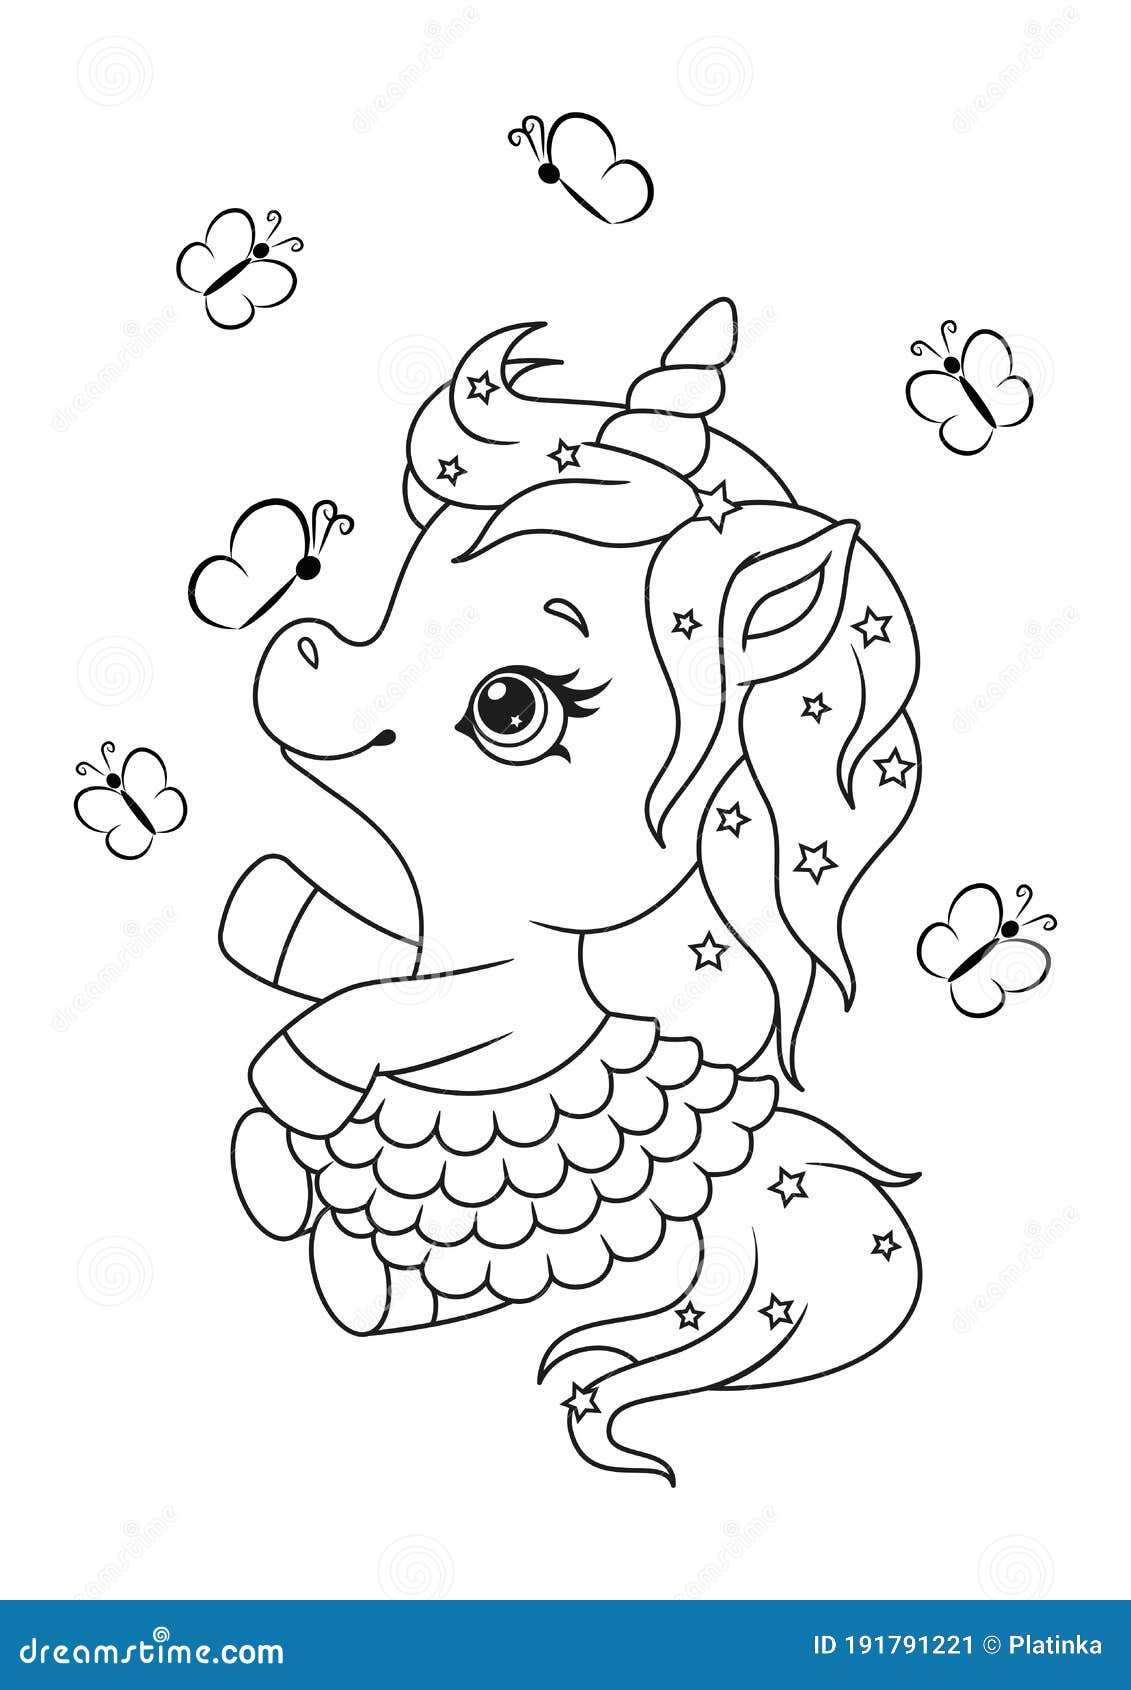 Unicorn coloring page stock illustrations â unicorn coloring page stock illustrations vectors clipart